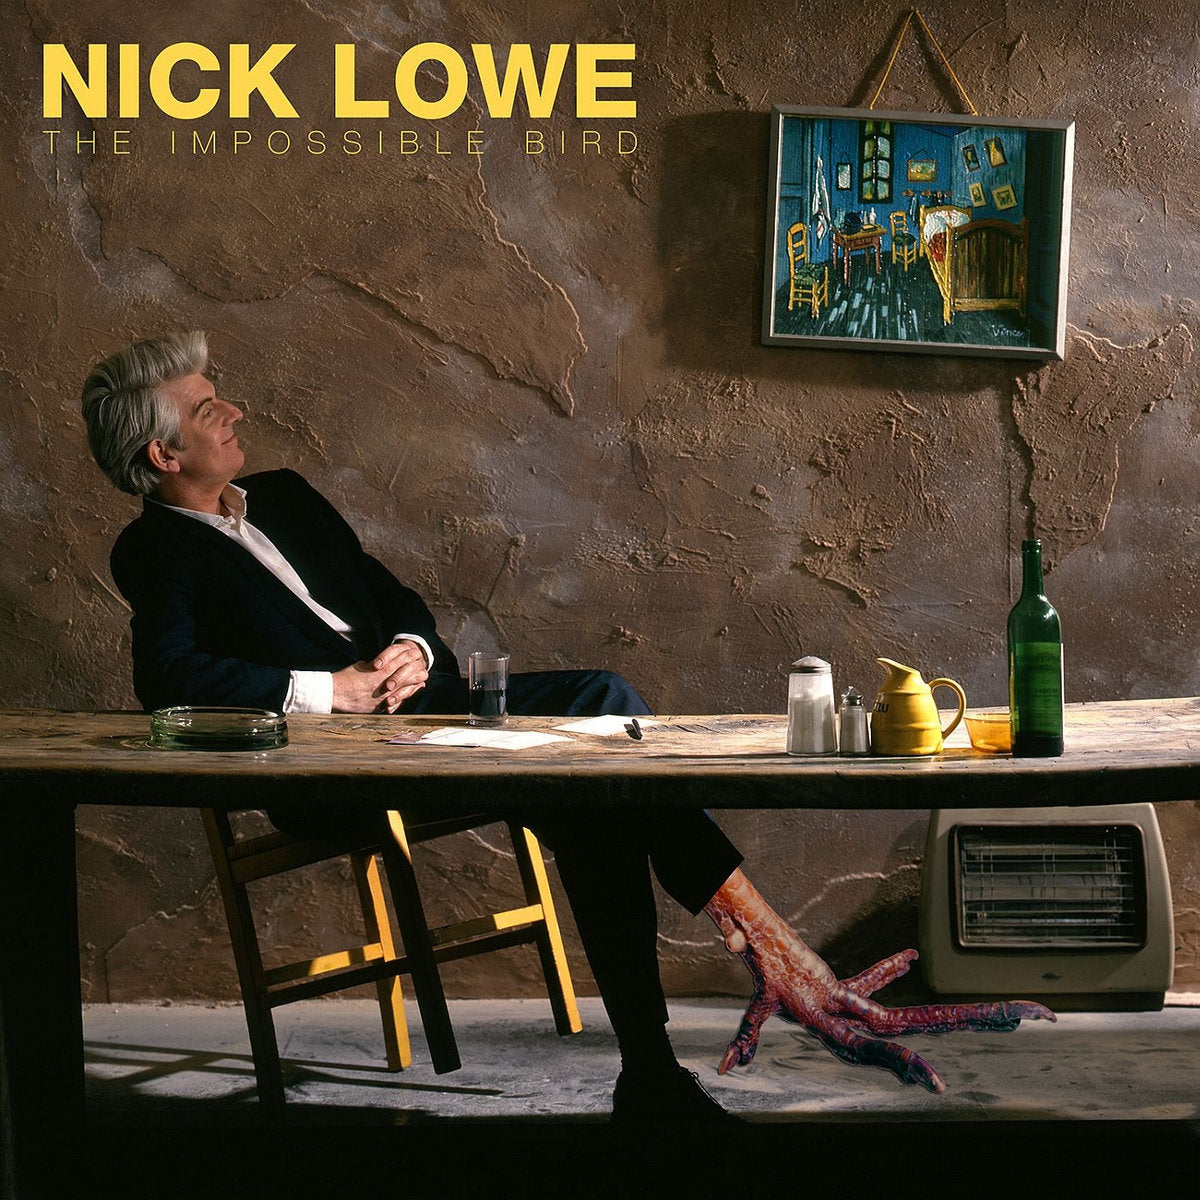 NICK LOWE 'THE IMPOSSIBLE BIRD' REMASTERED LP